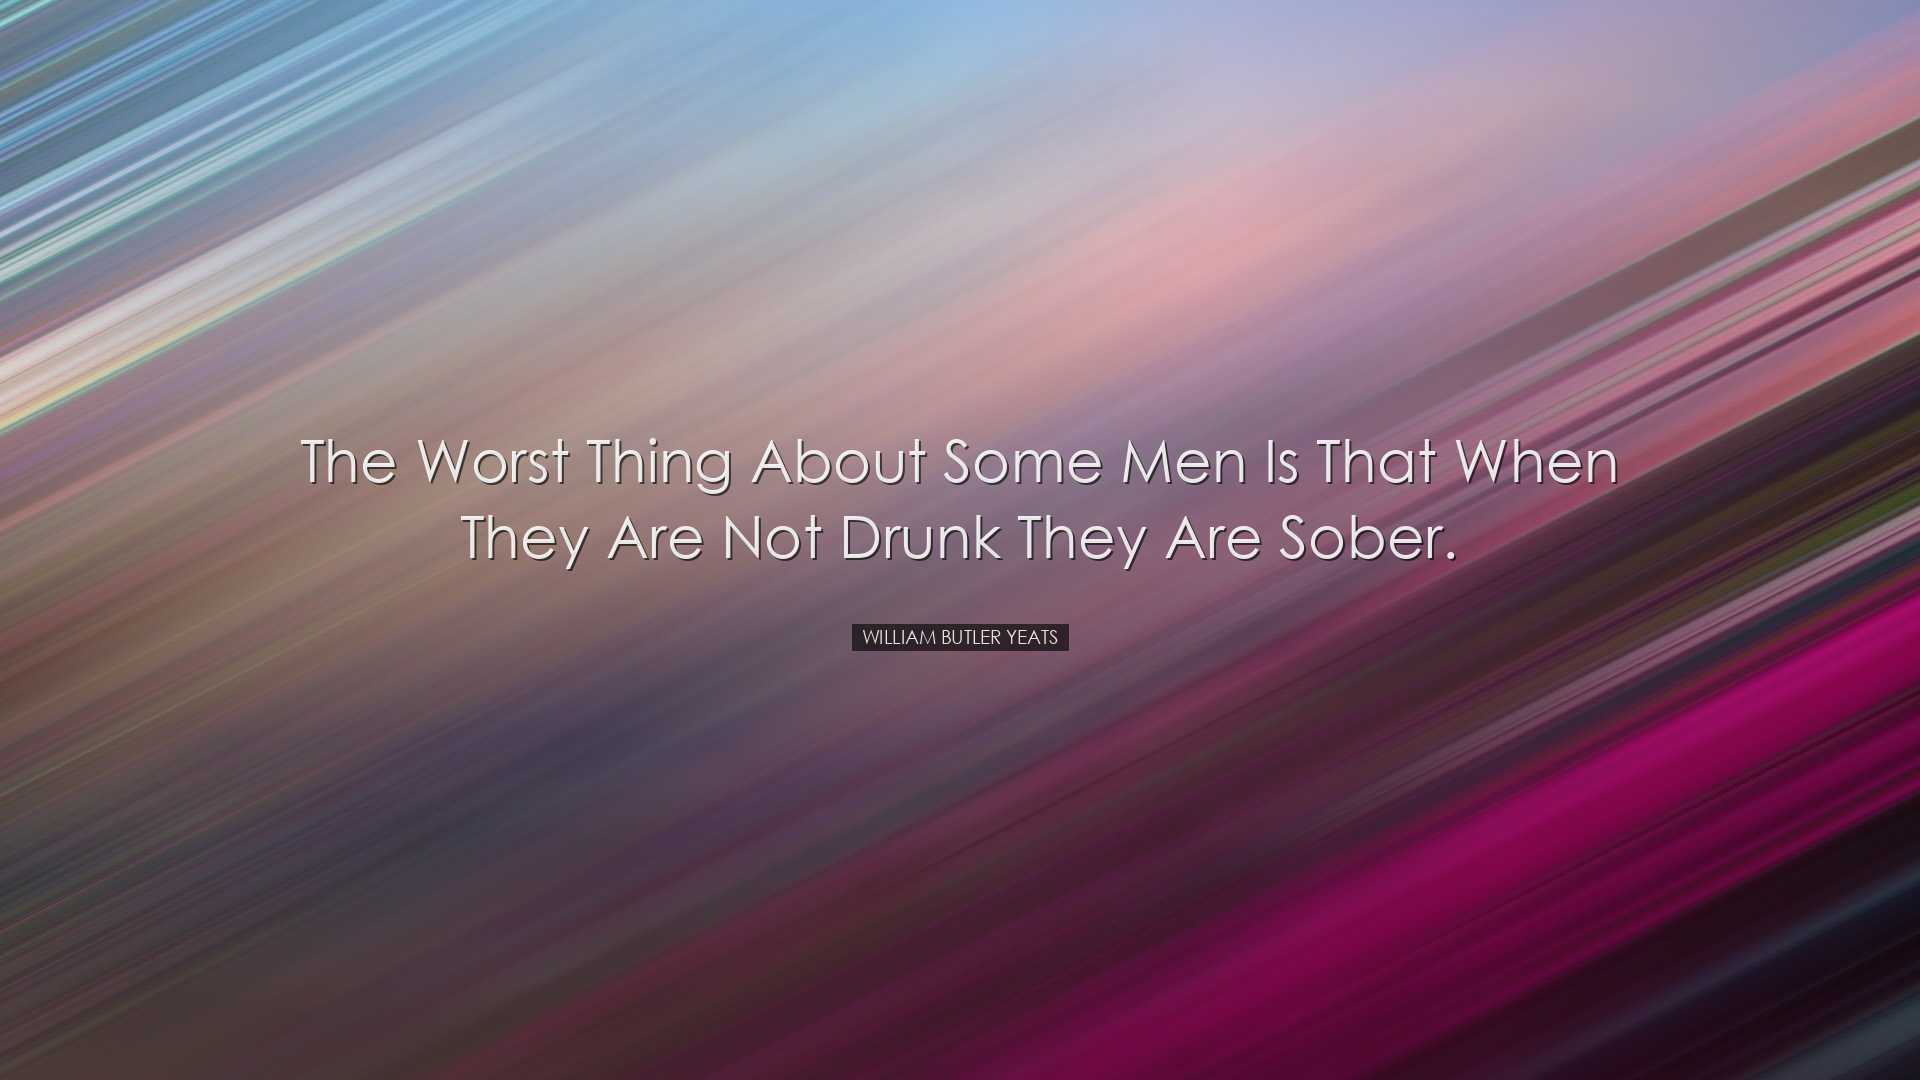 The worst thing about some men is that when they are not drunk the